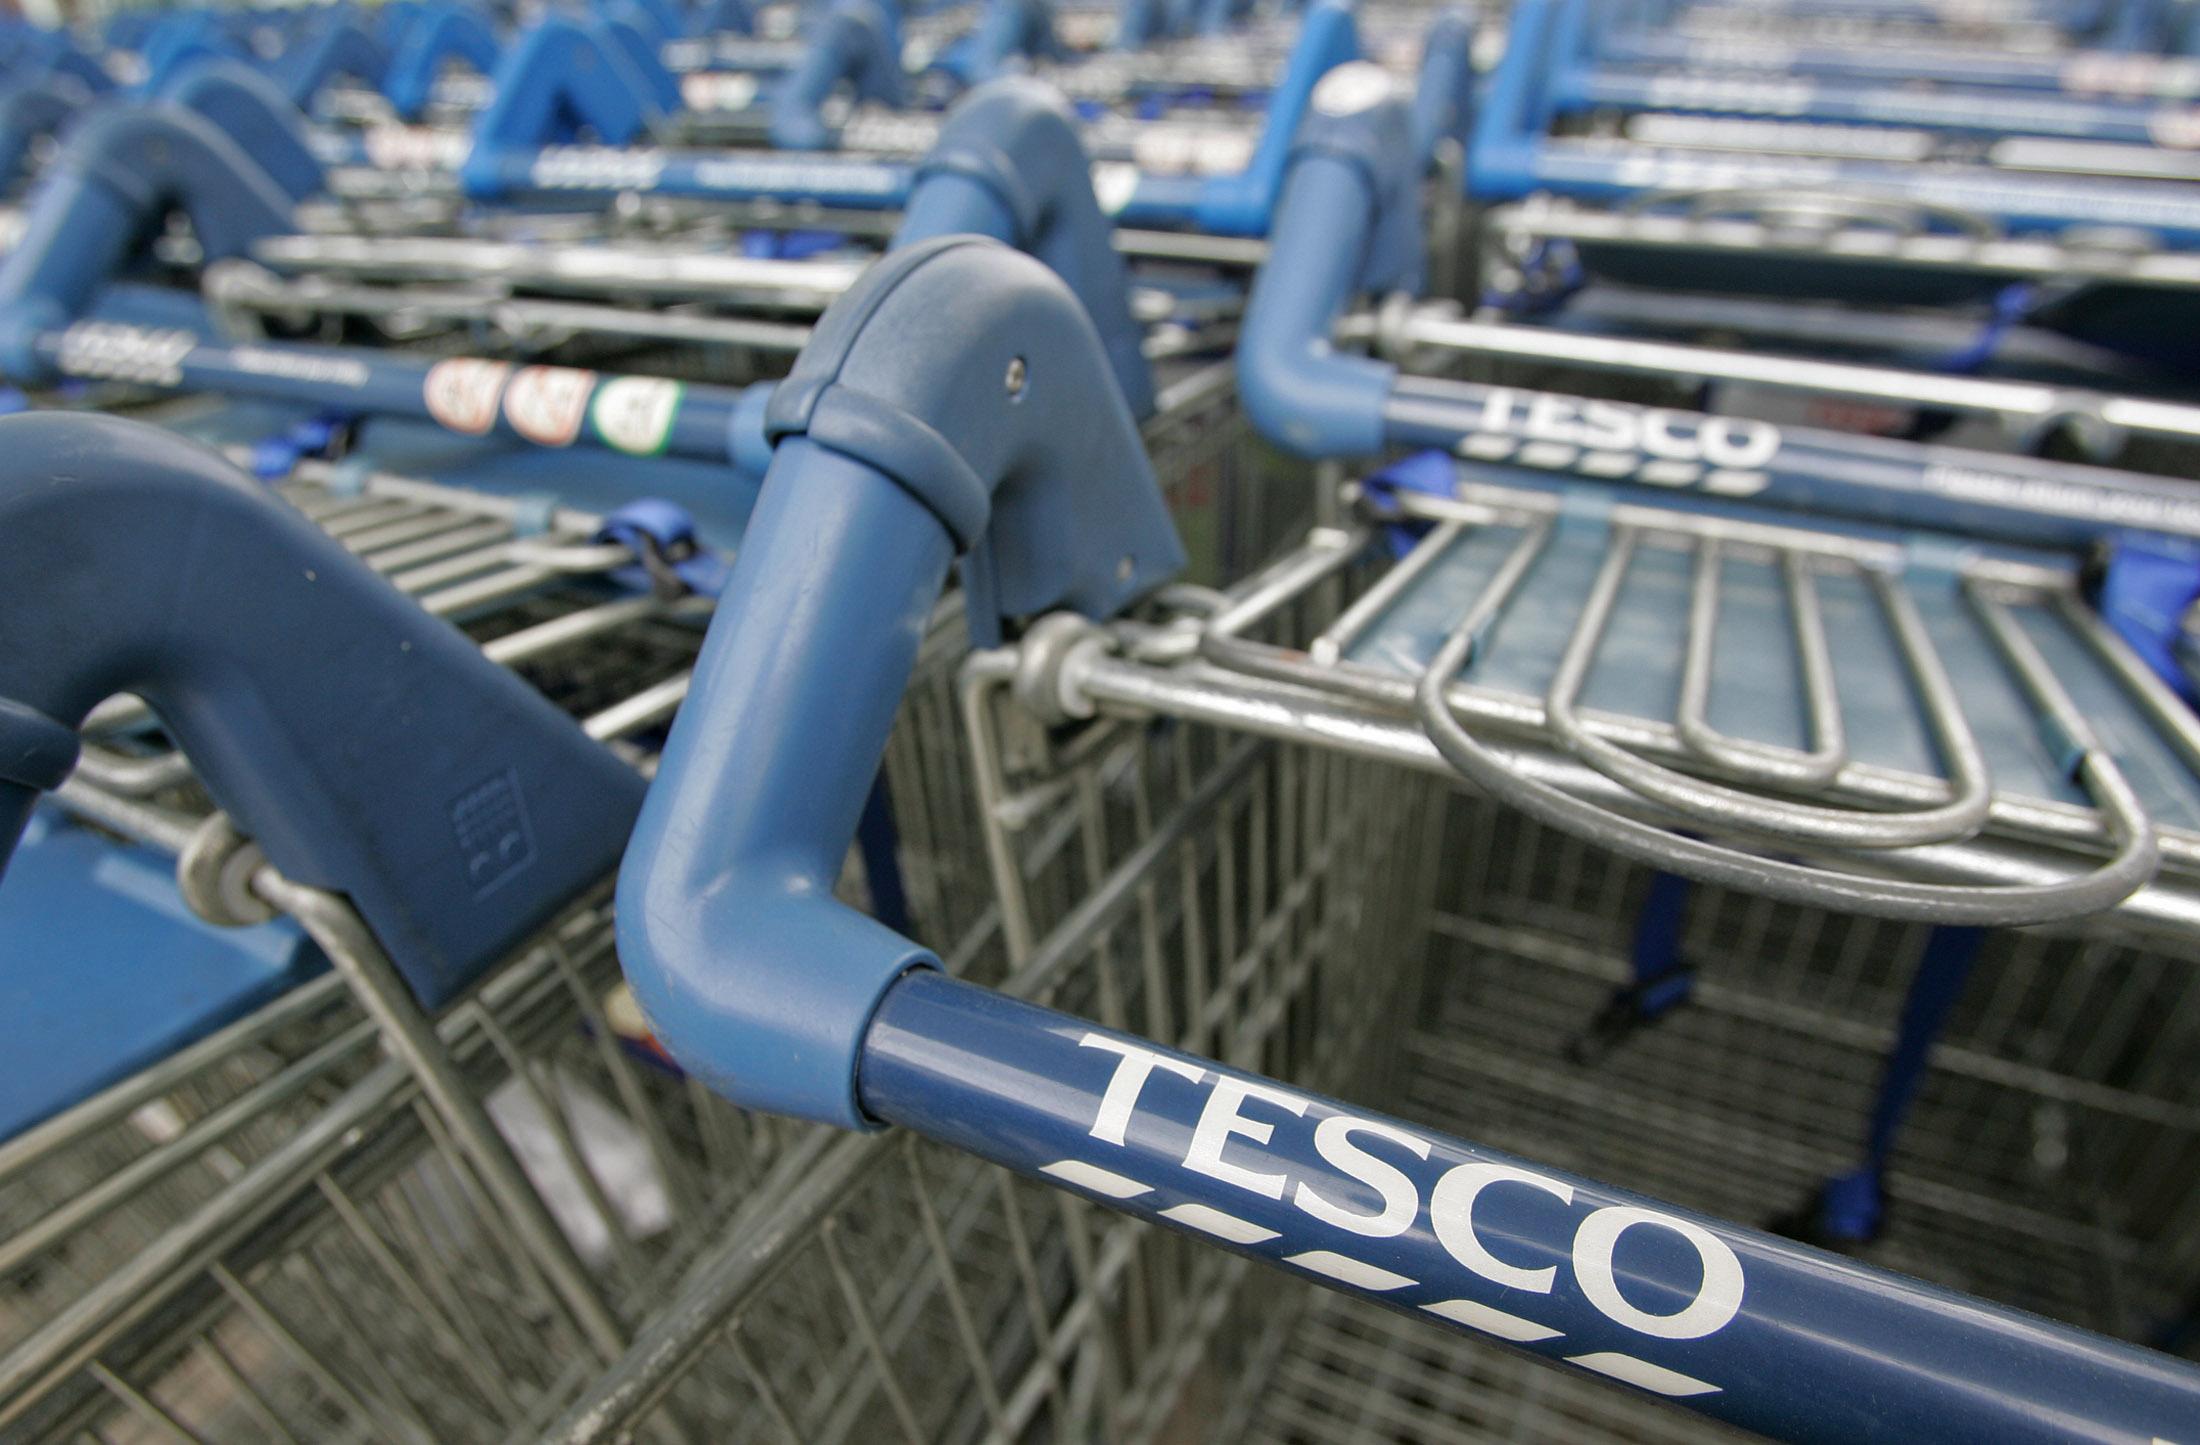 A possible merger between Tesco and Carrefour was previously the subject of market speculation more than a decade ago